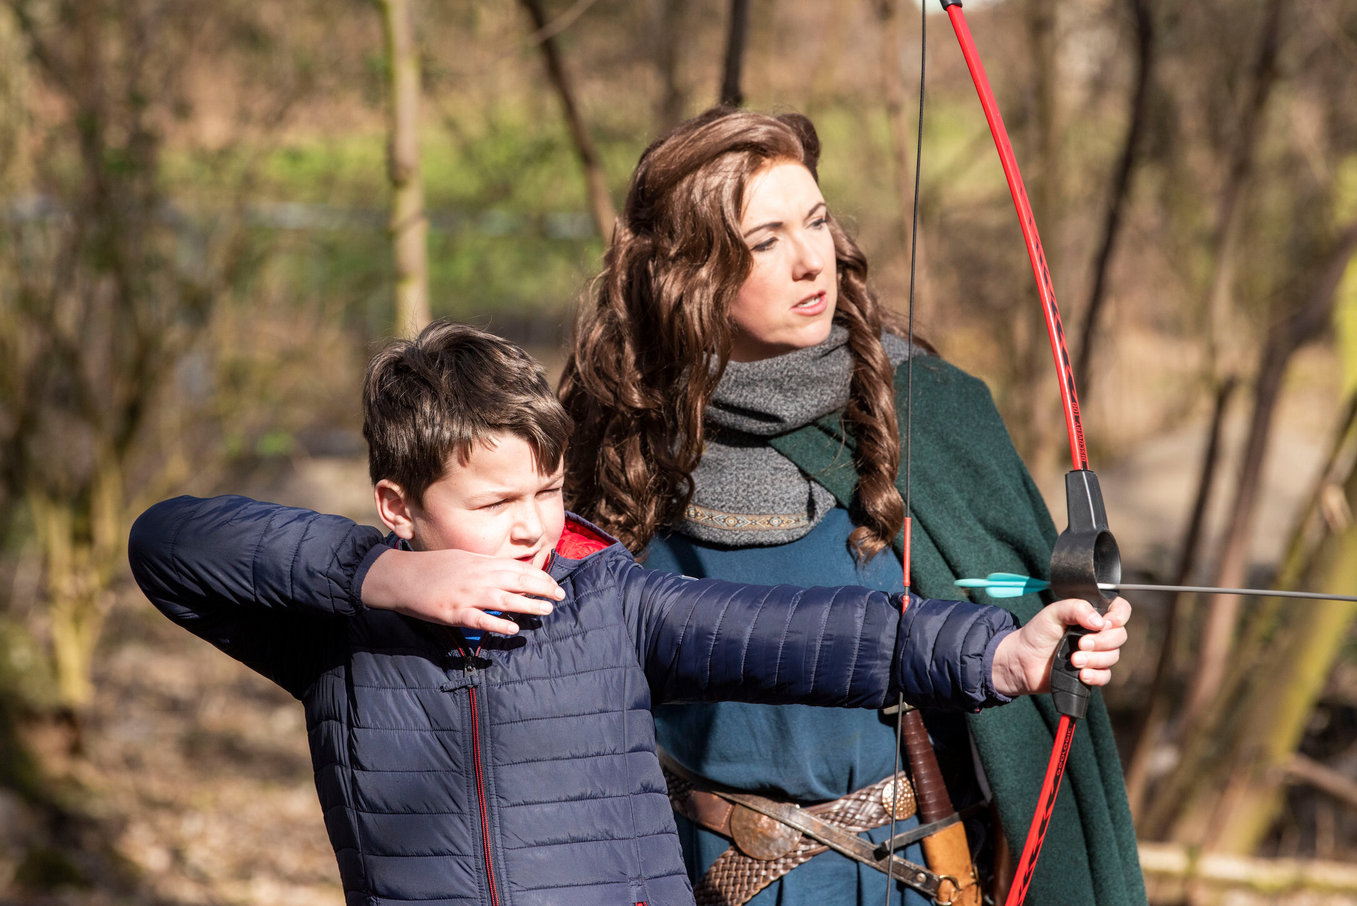 Shewood Image Of Child Shooting Bow With Marion